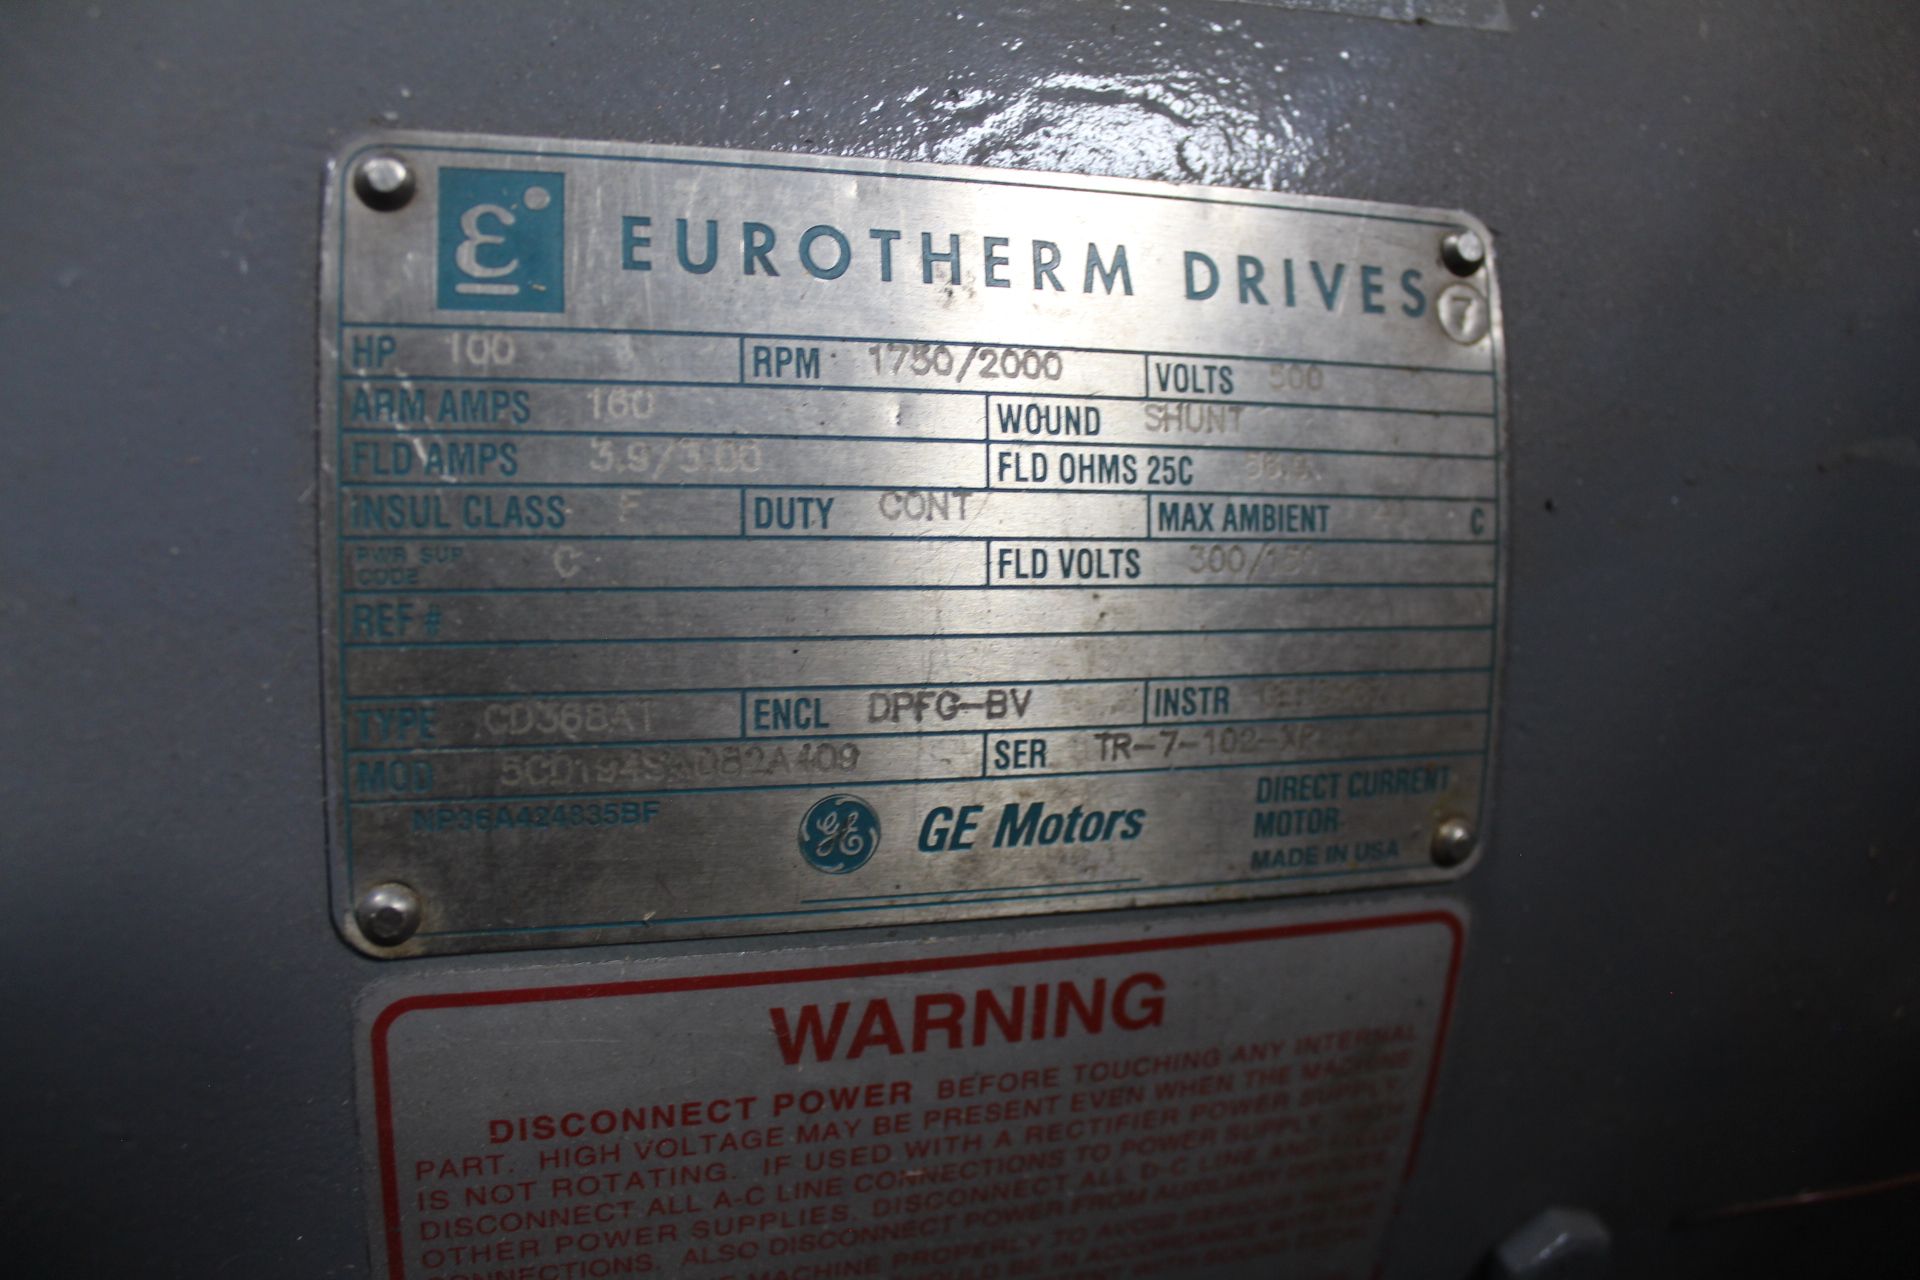 GE Eurotherm 100-Hp DC Motor, 500 Volts, 1750/2000 RPM; Motor Room - Image 2 of 2